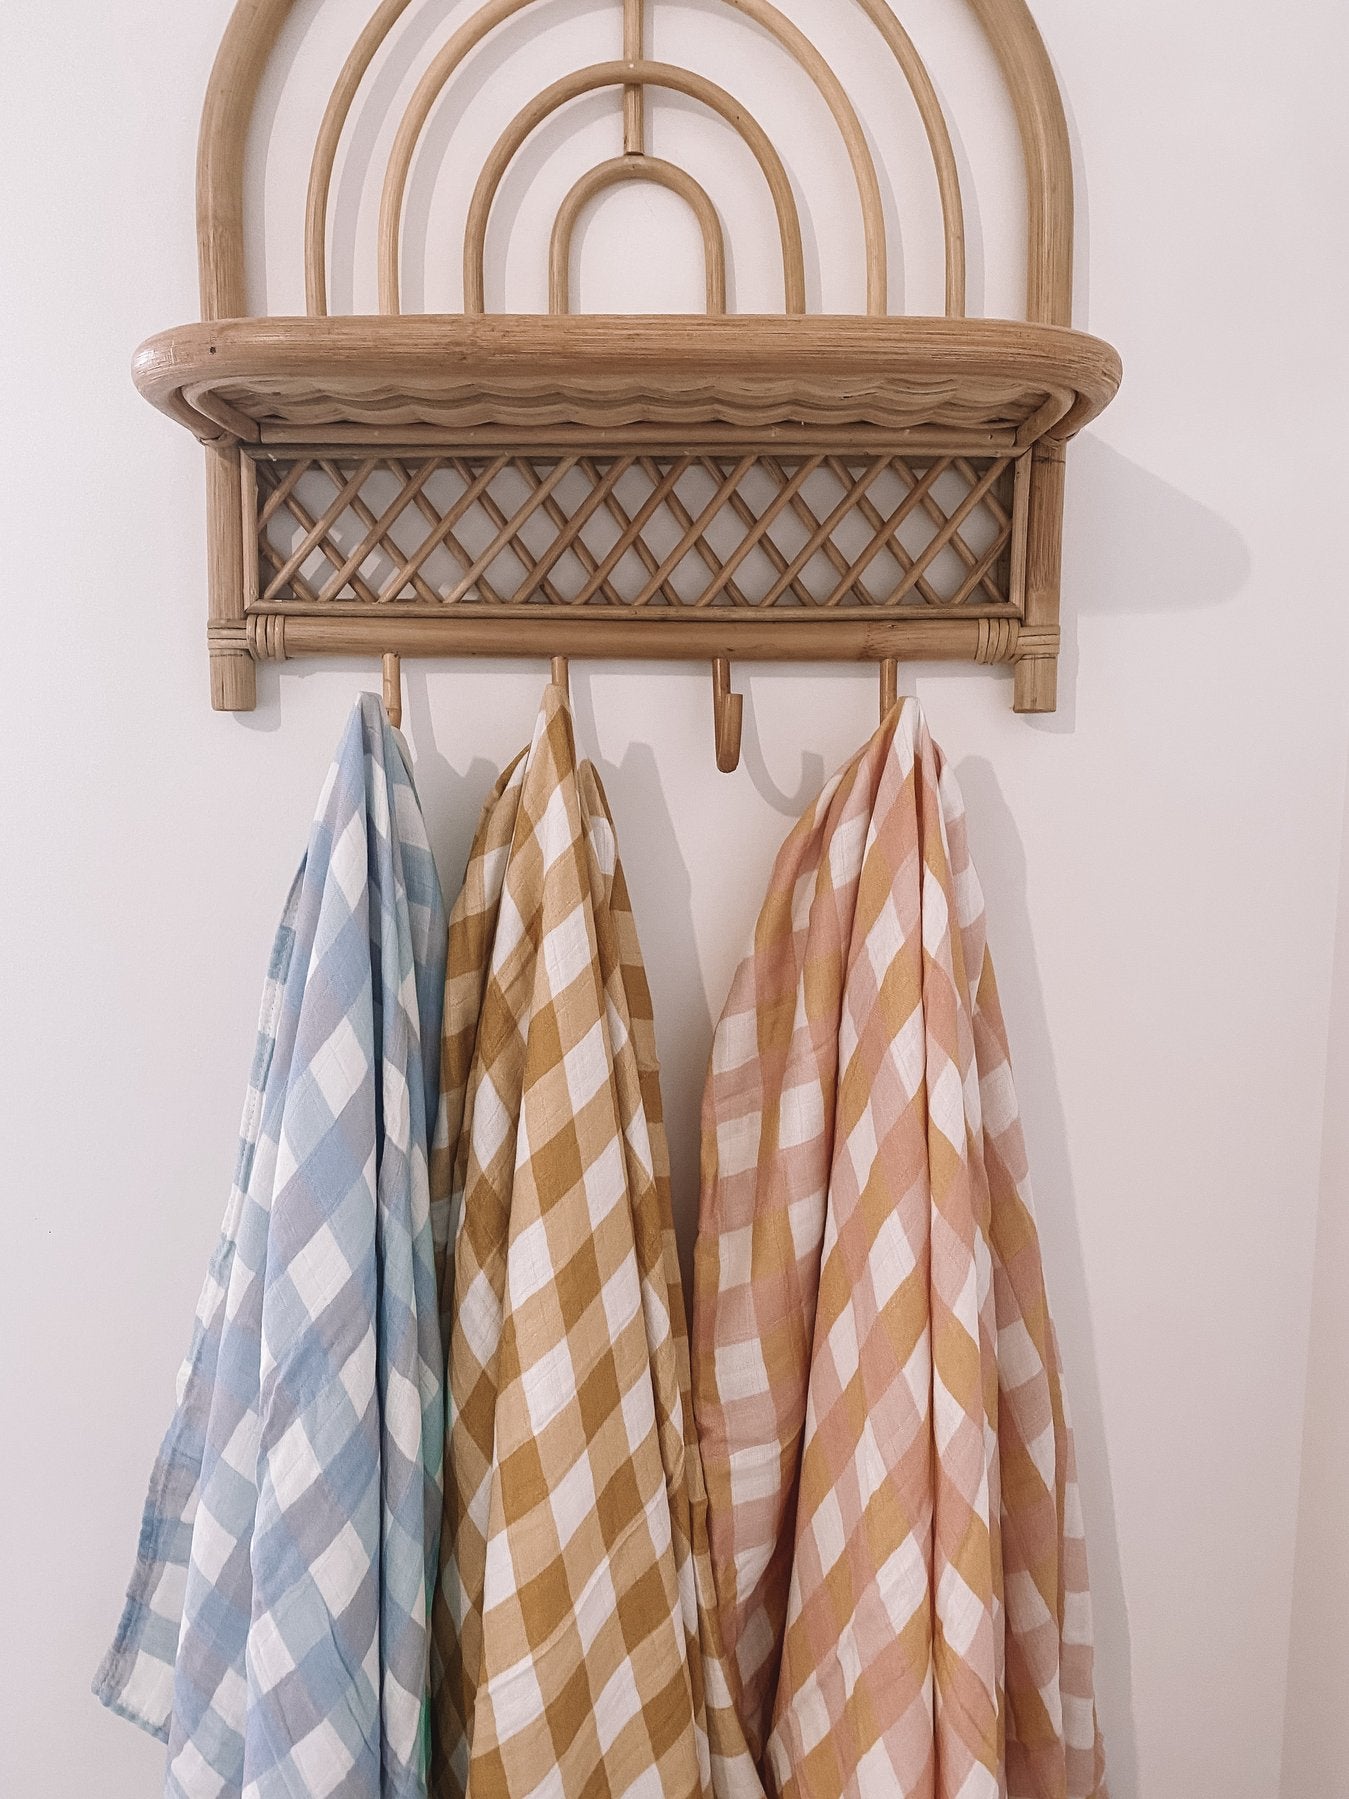 Milky Designs baby bay swaddle/wrap - Toffee Gingham - Angus & Dudley Collections